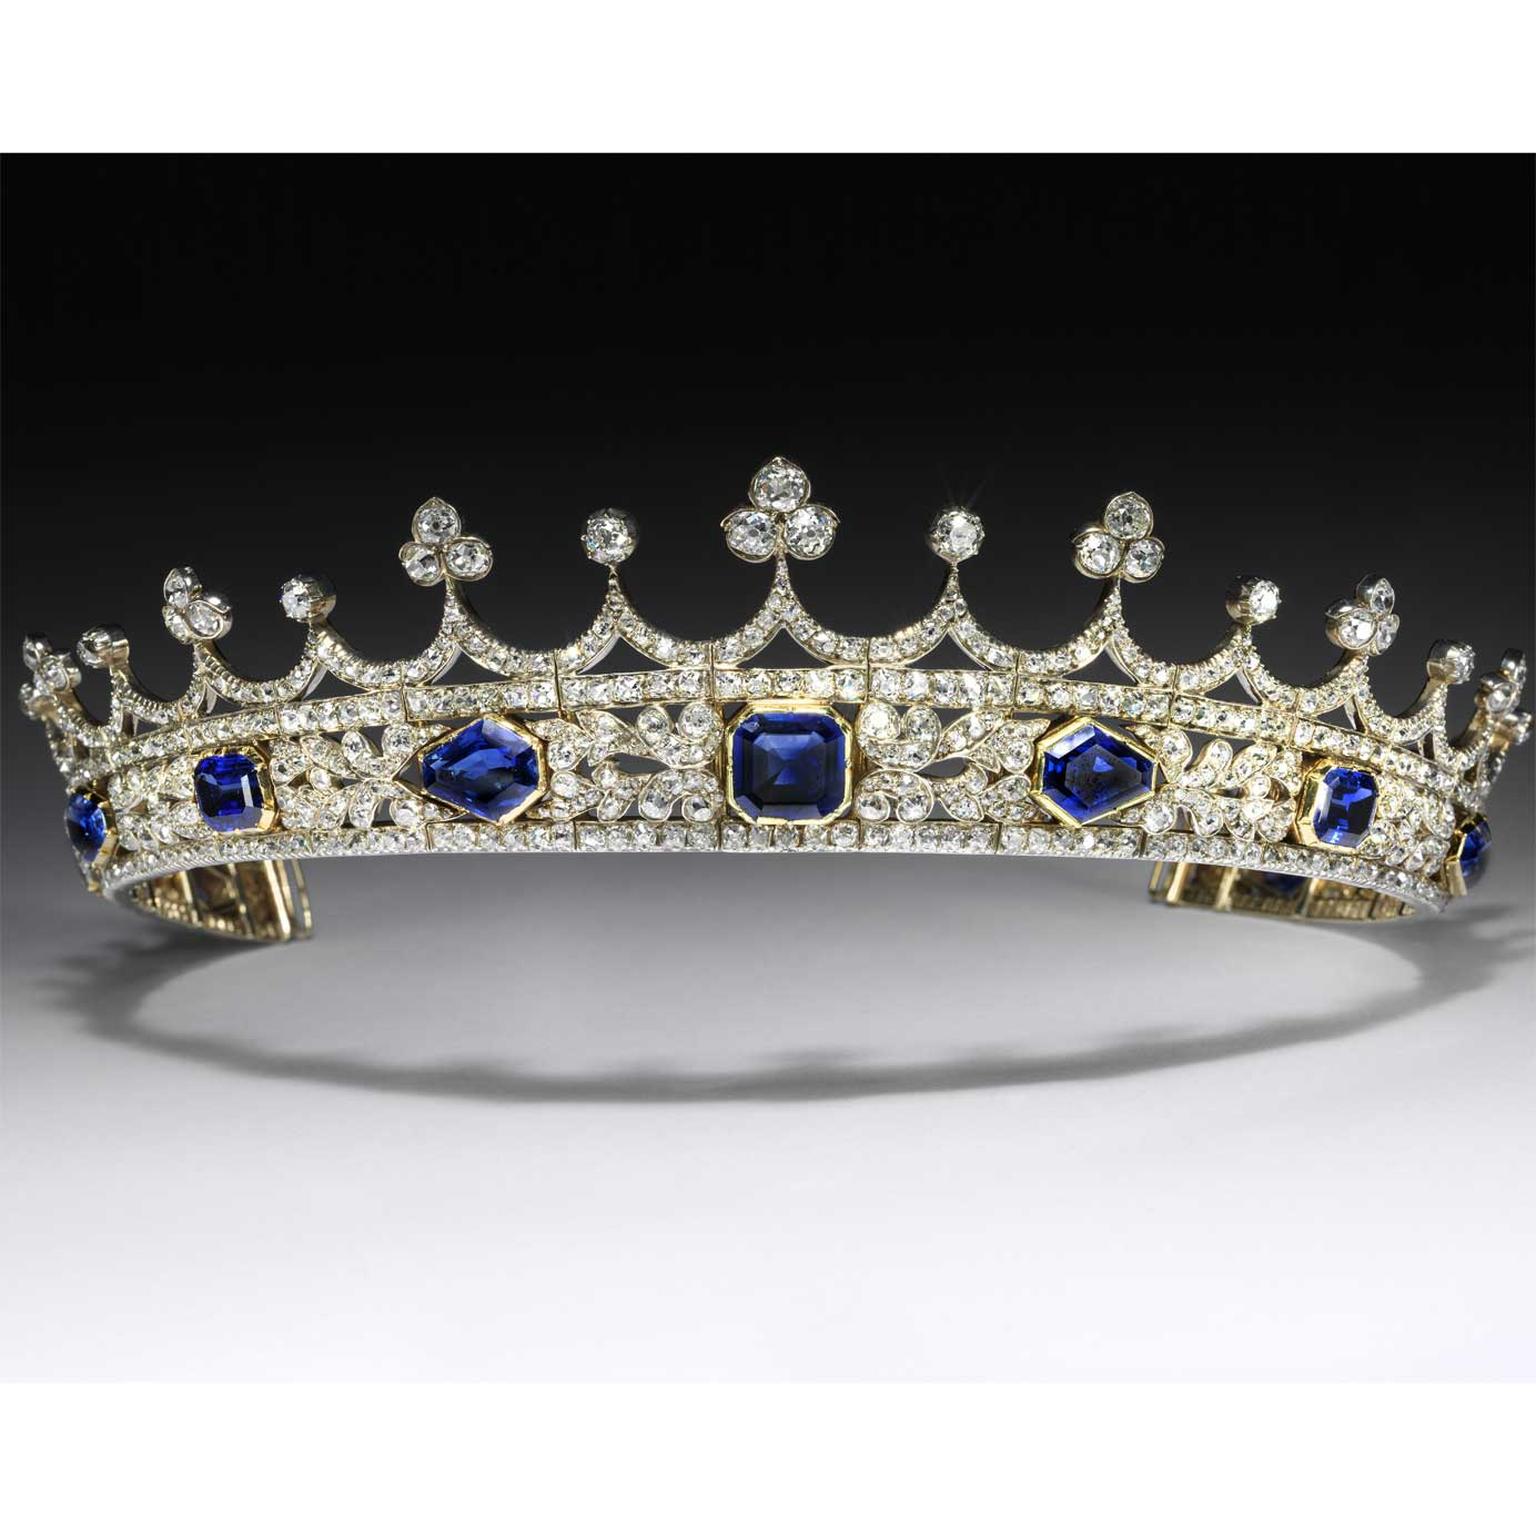 Newly Refurbished V&A showcases Queen Victoria's coronet